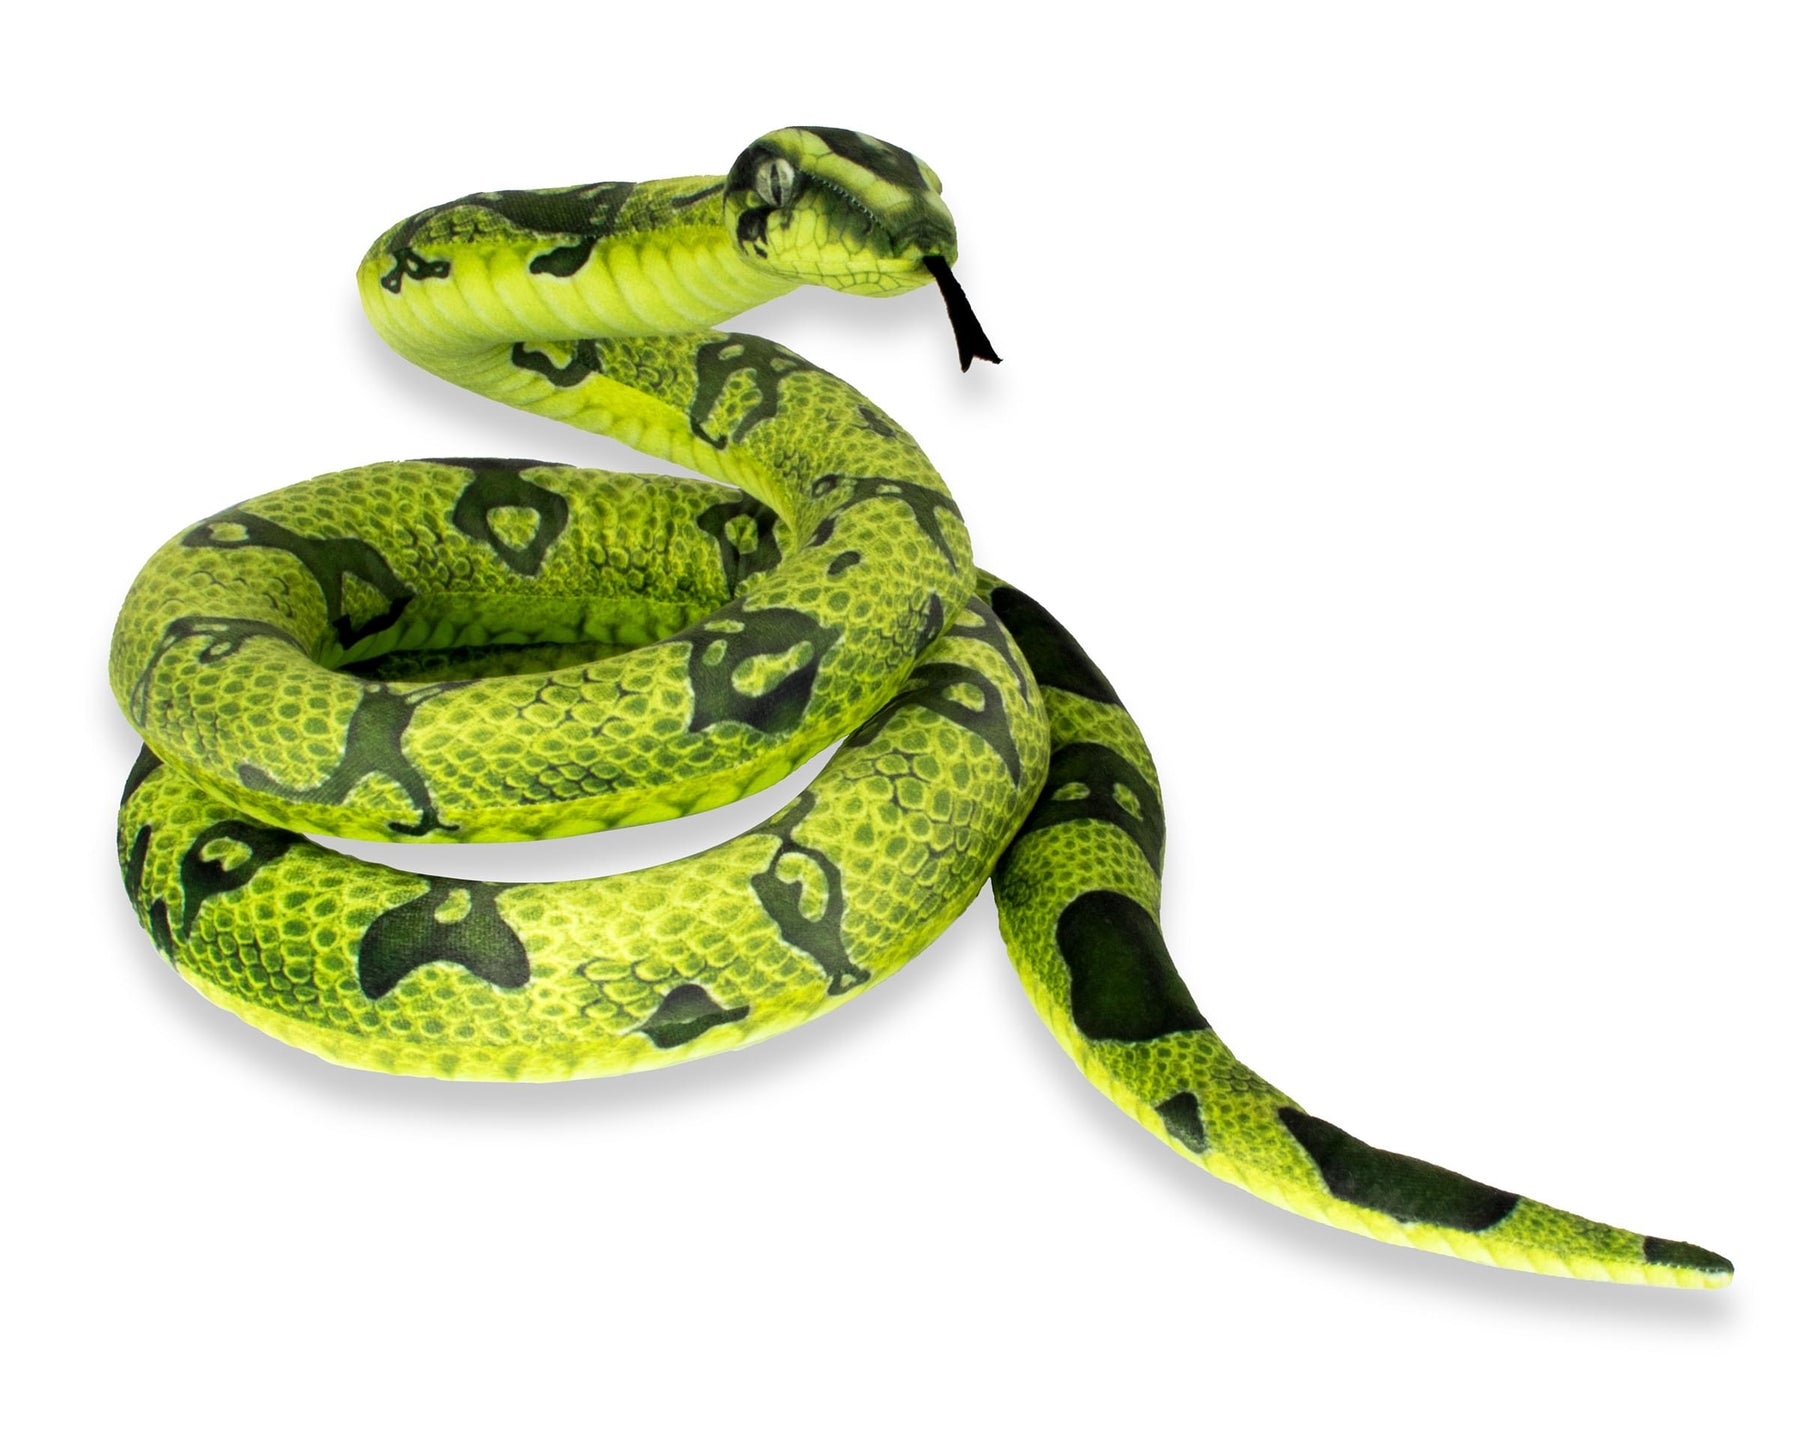 Real Planet Python Green 78.7 Inch Realistic Soft Plush